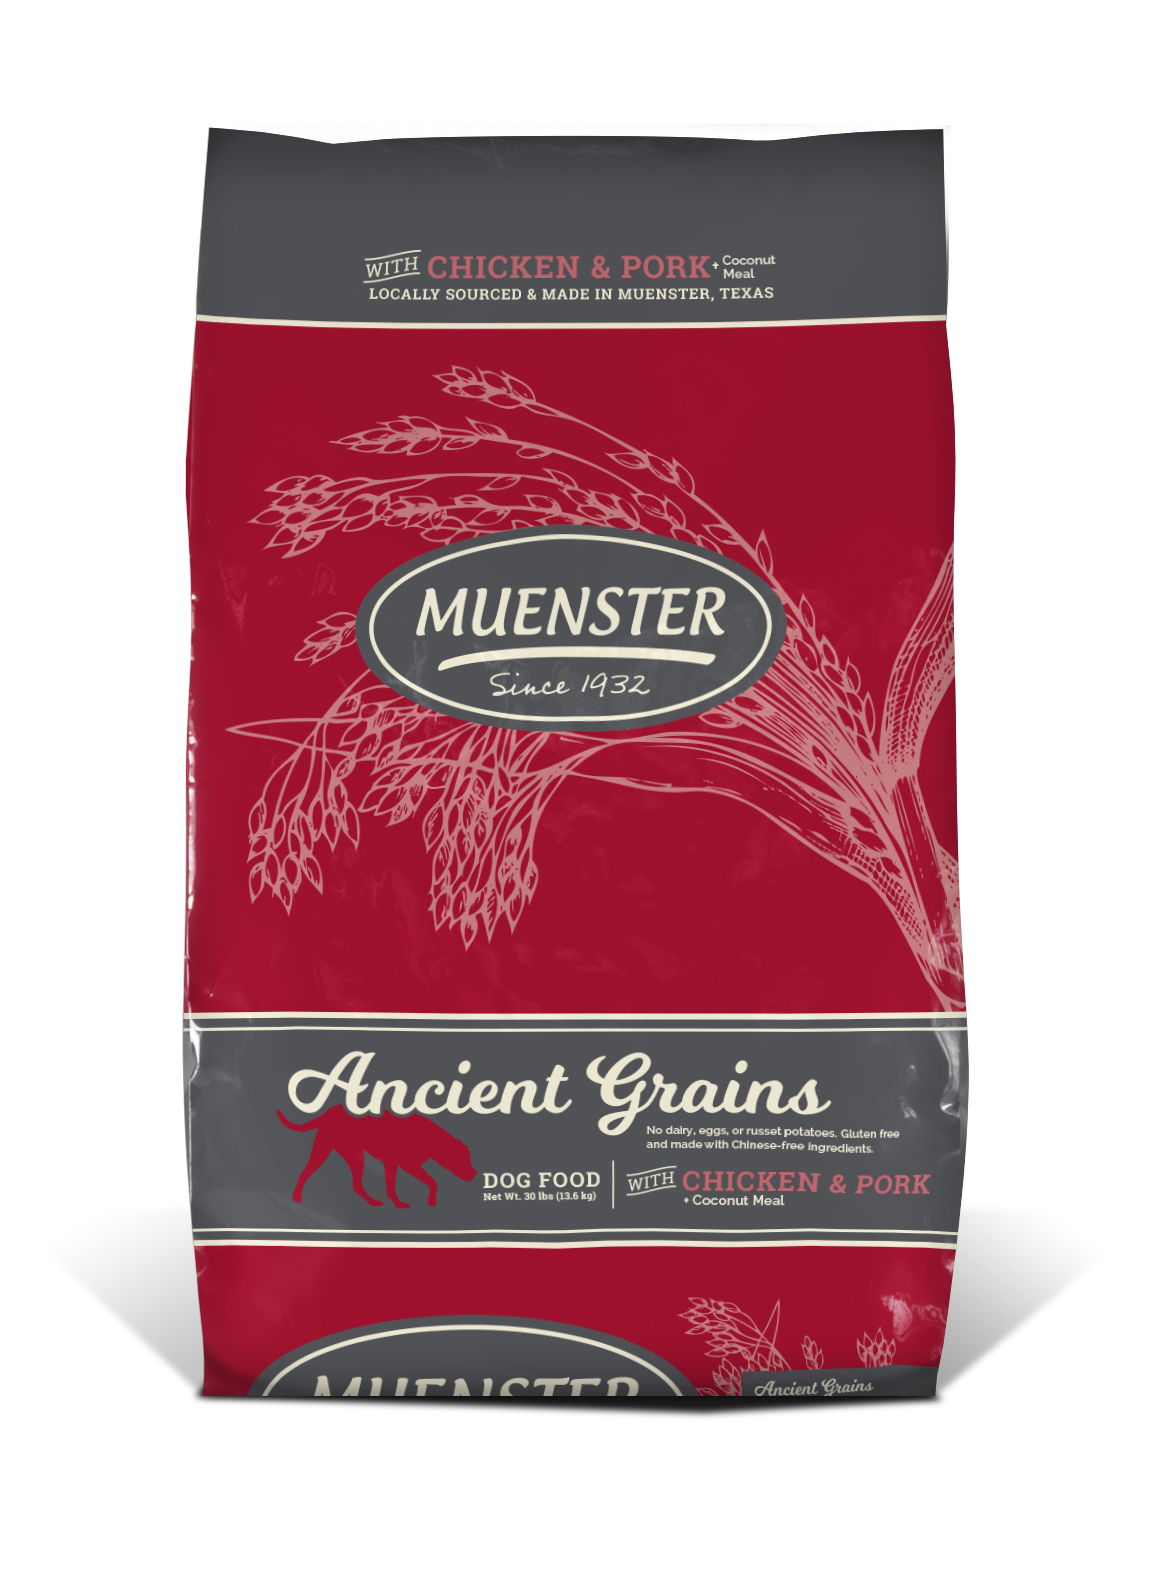 Muenster Ancient Grains with Chicken & Pork Dog Food, 22 lbs